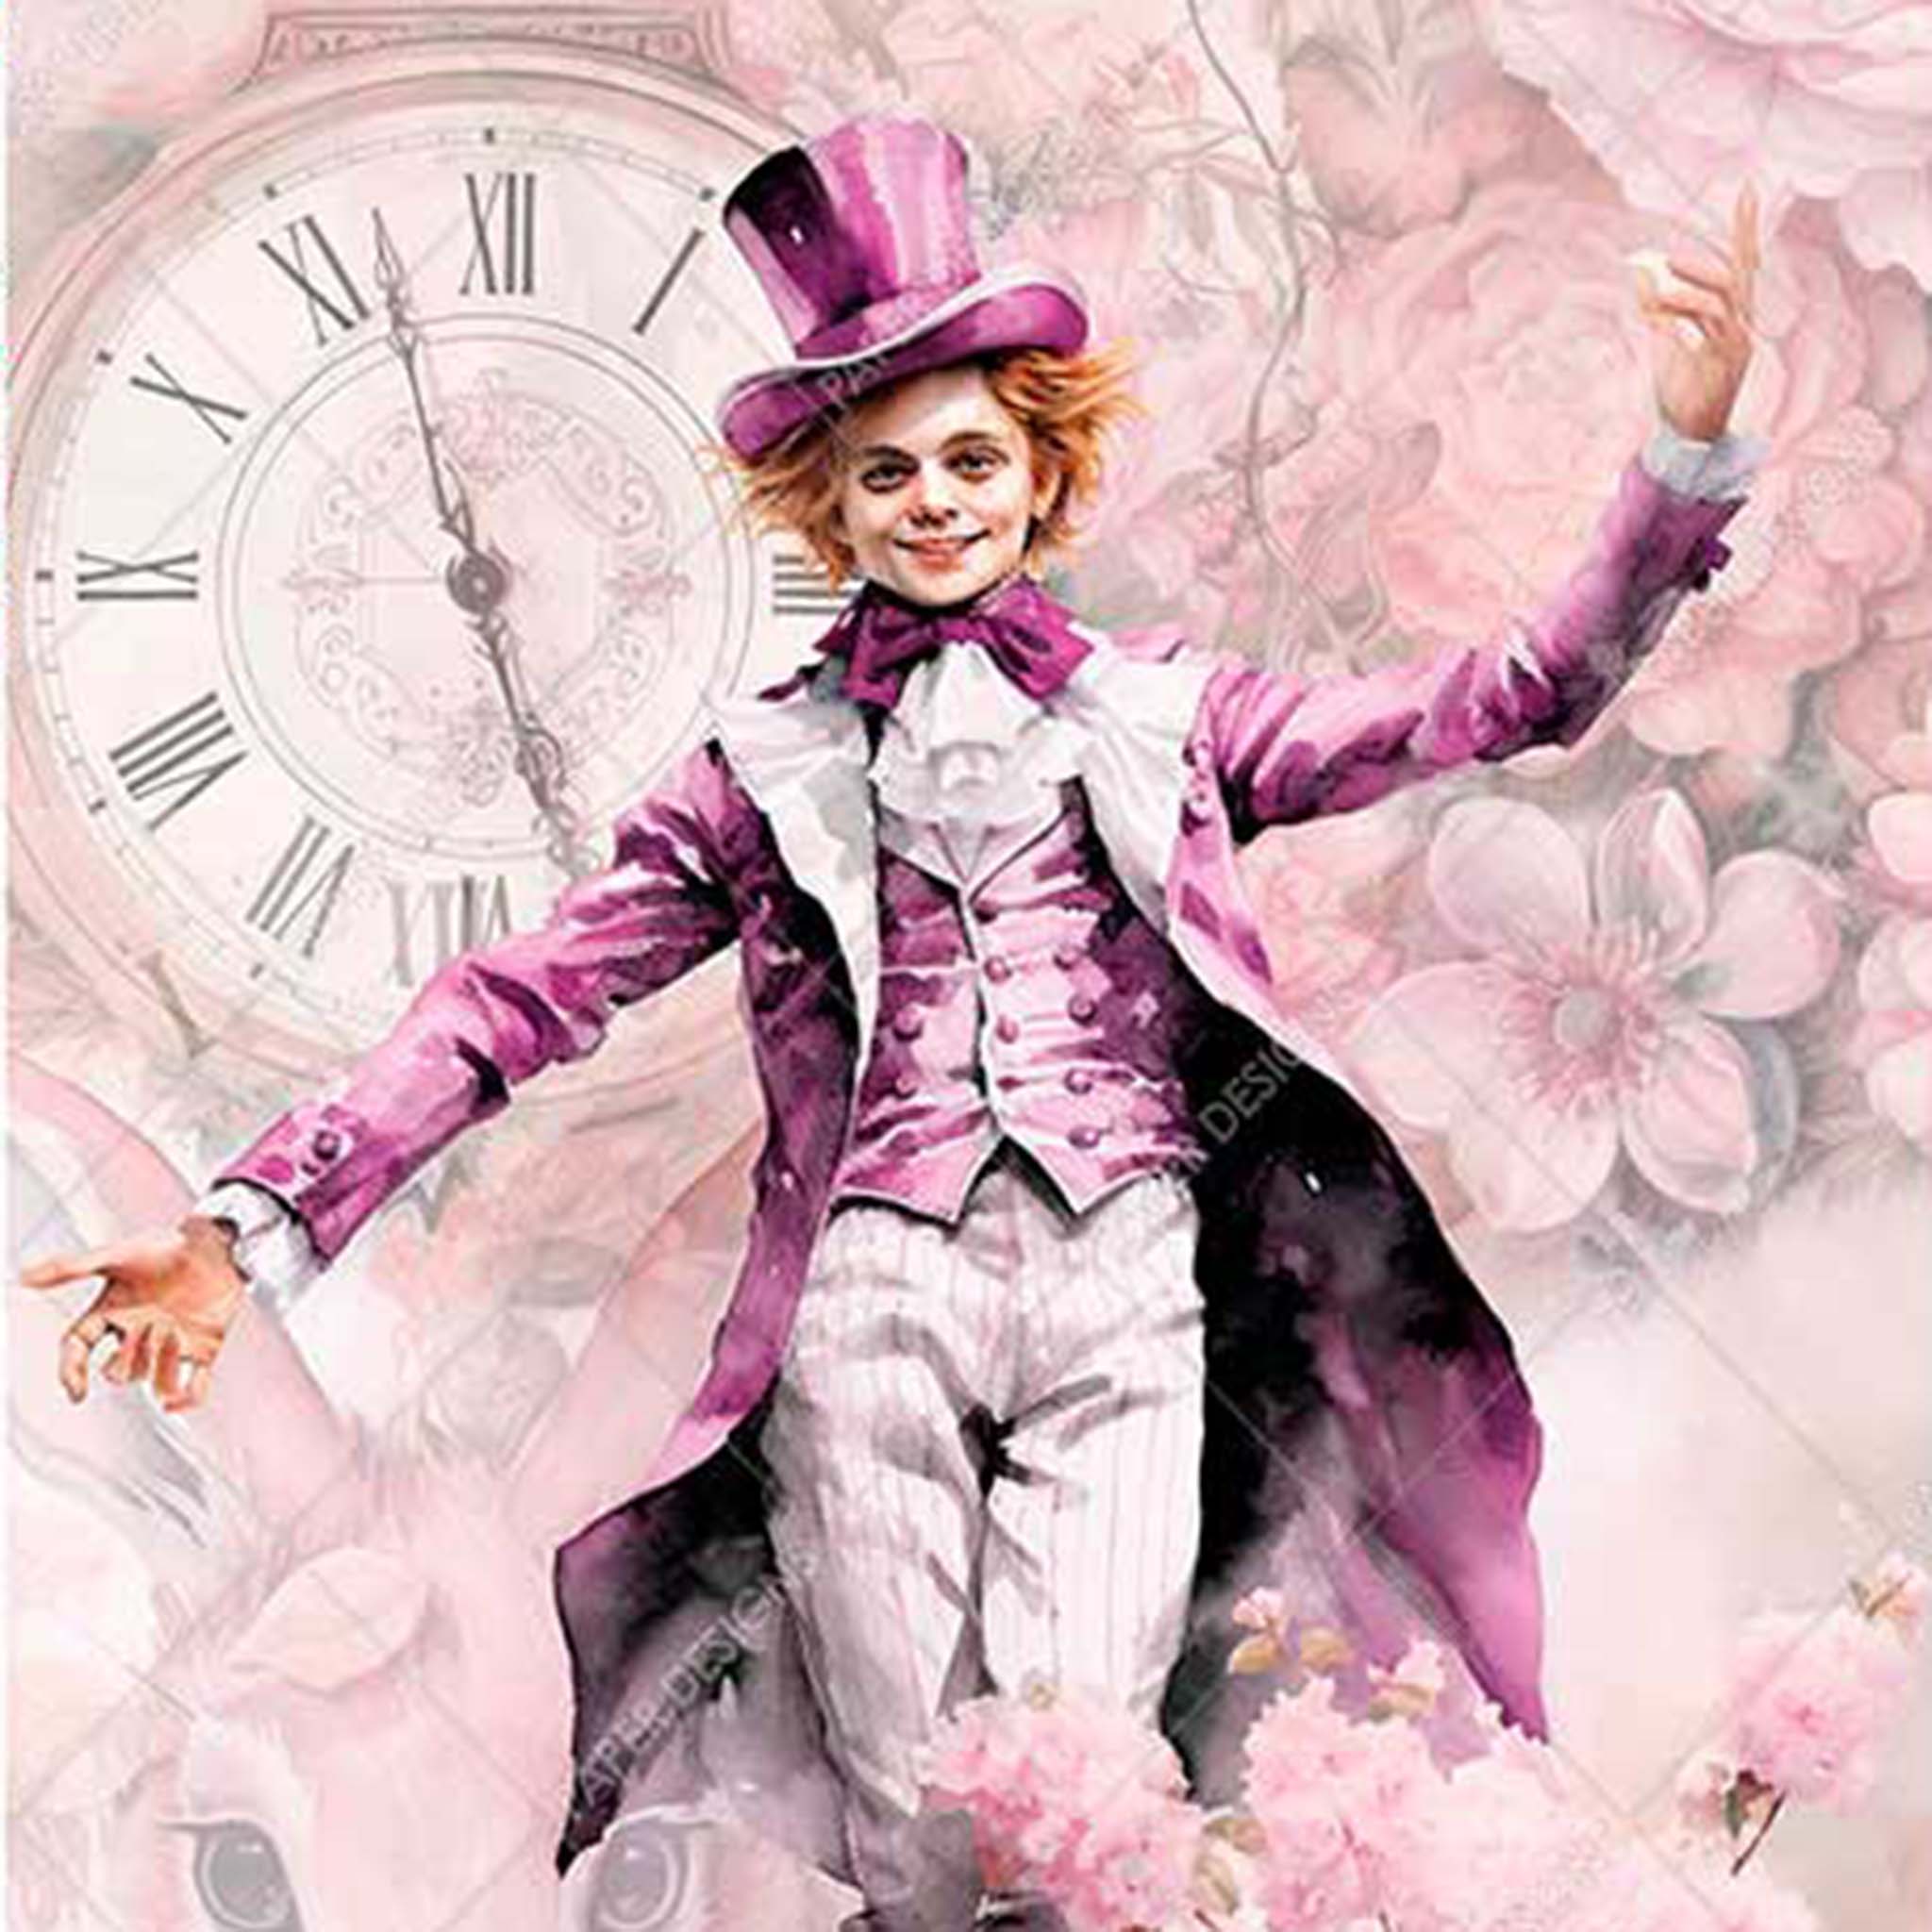 Close-up of an A4 rice paper design featuring The Mad Hatter and a tea set against a large clock face and rabit face in front of a pink floral background.